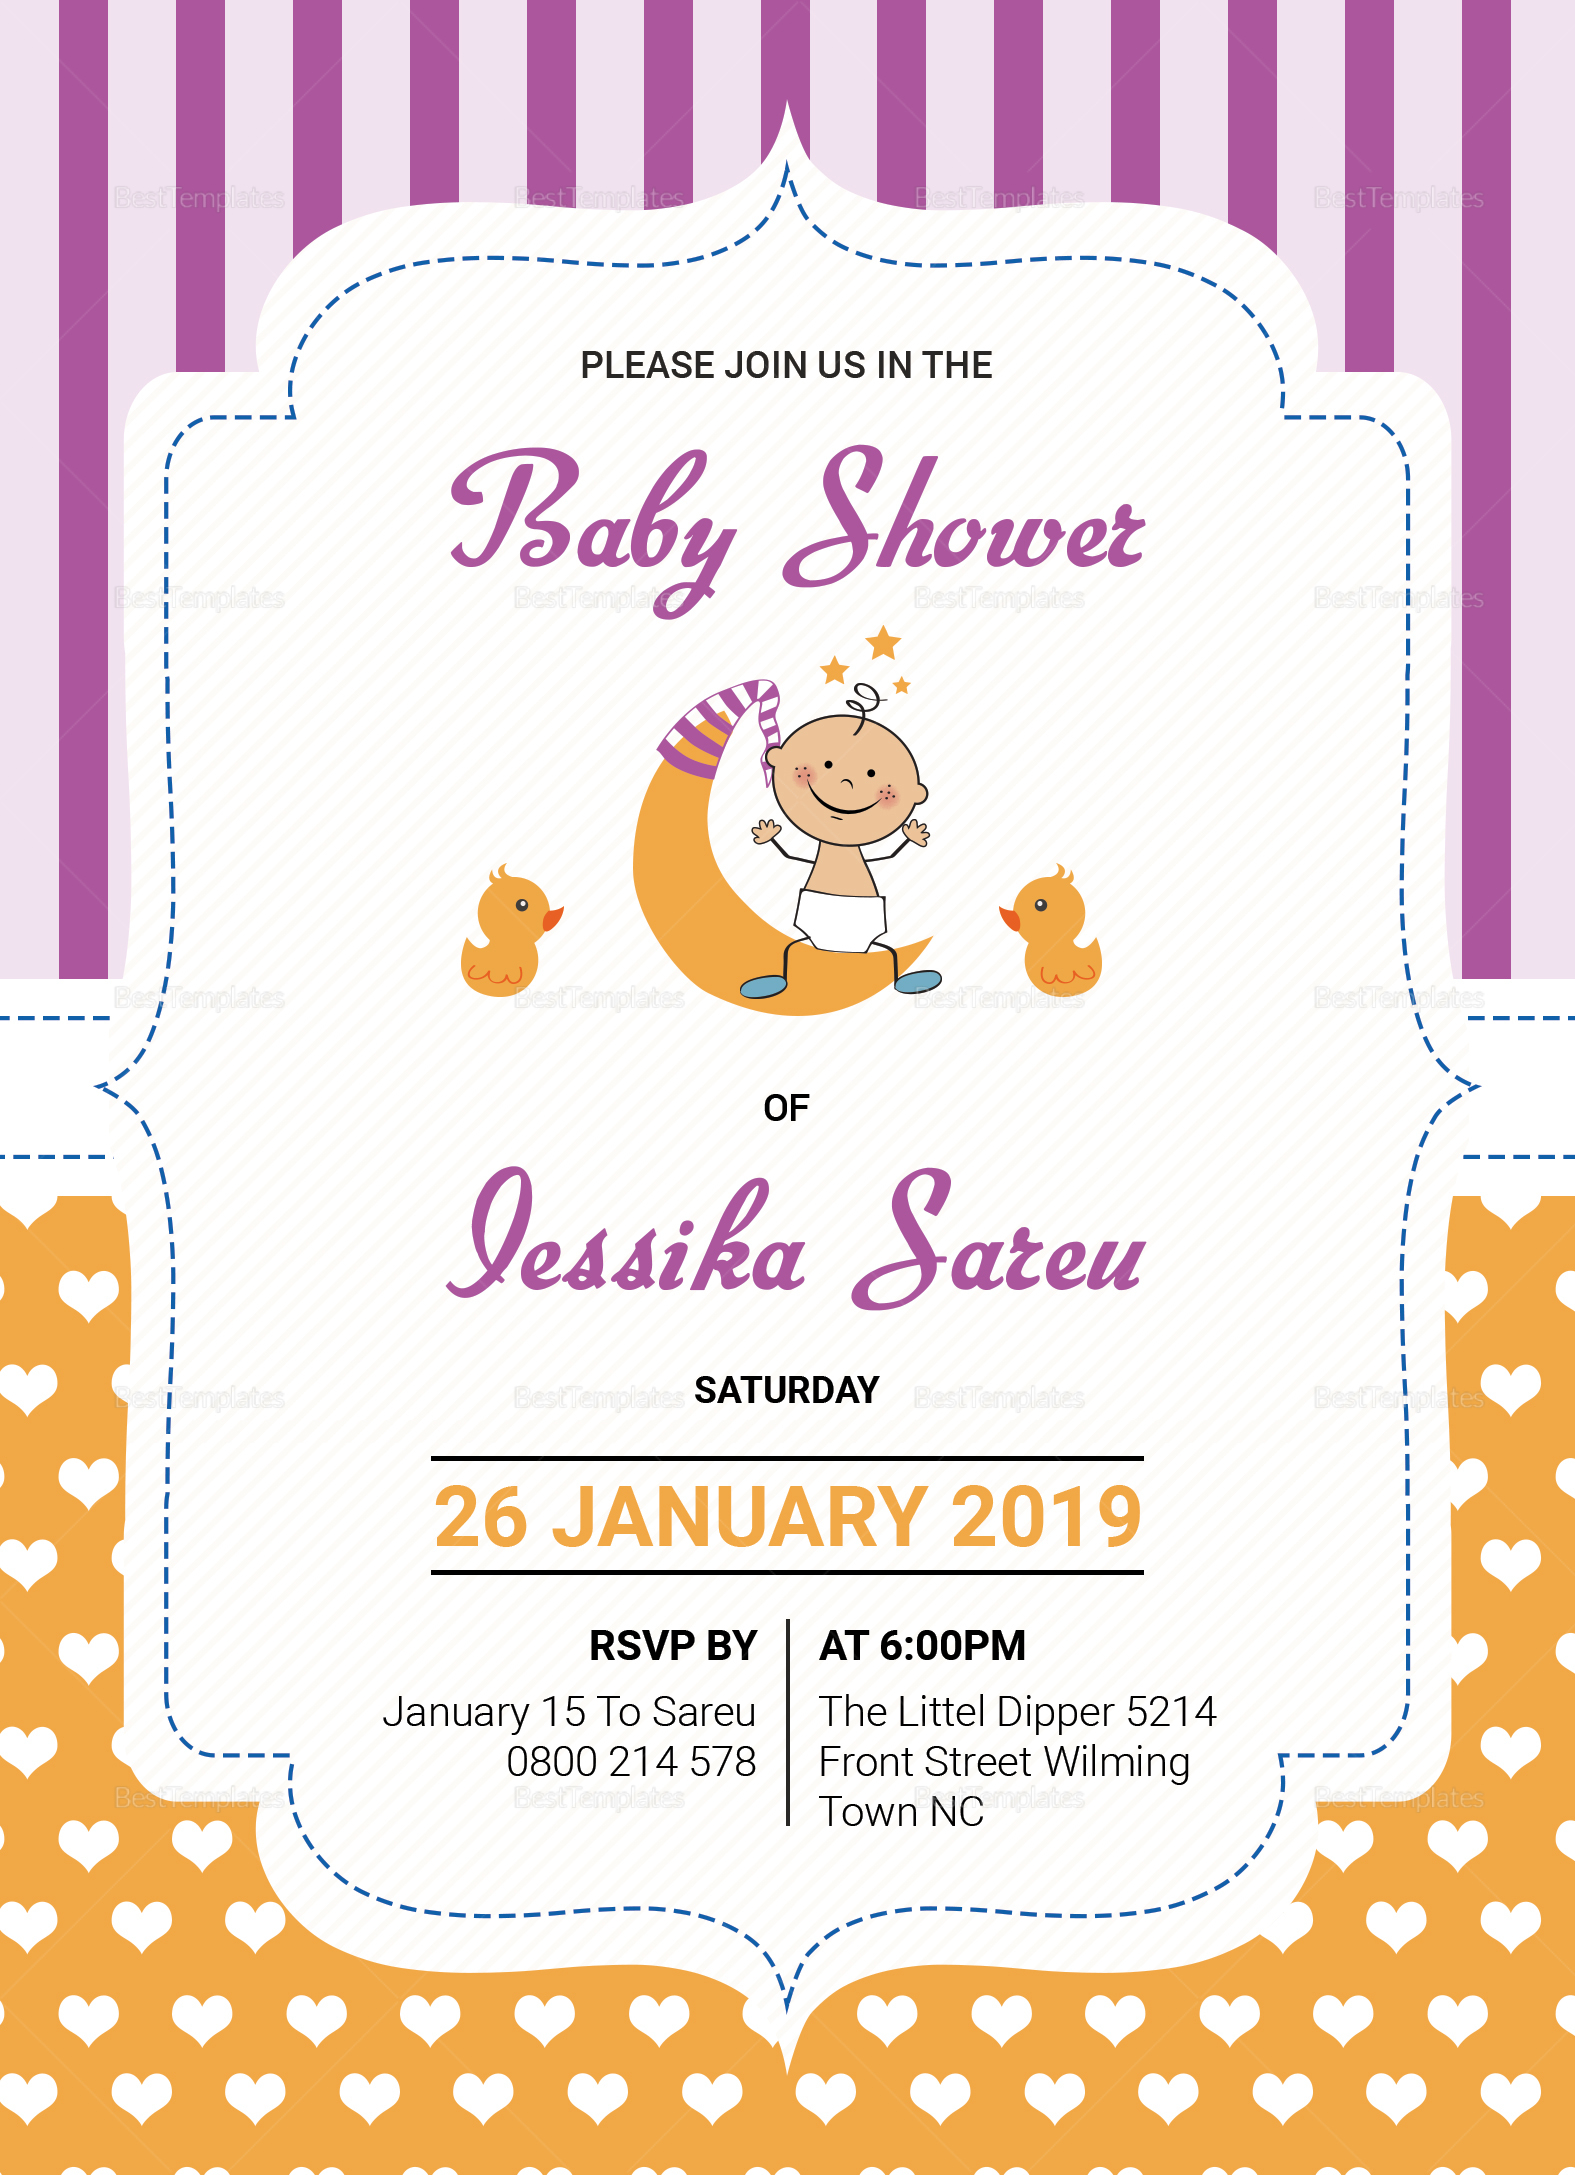 Colorful Baby Shower Invitation Card Template With Baby Shower Invitation Flyer Template Throughout Baby Shower Invitation Flyer Template